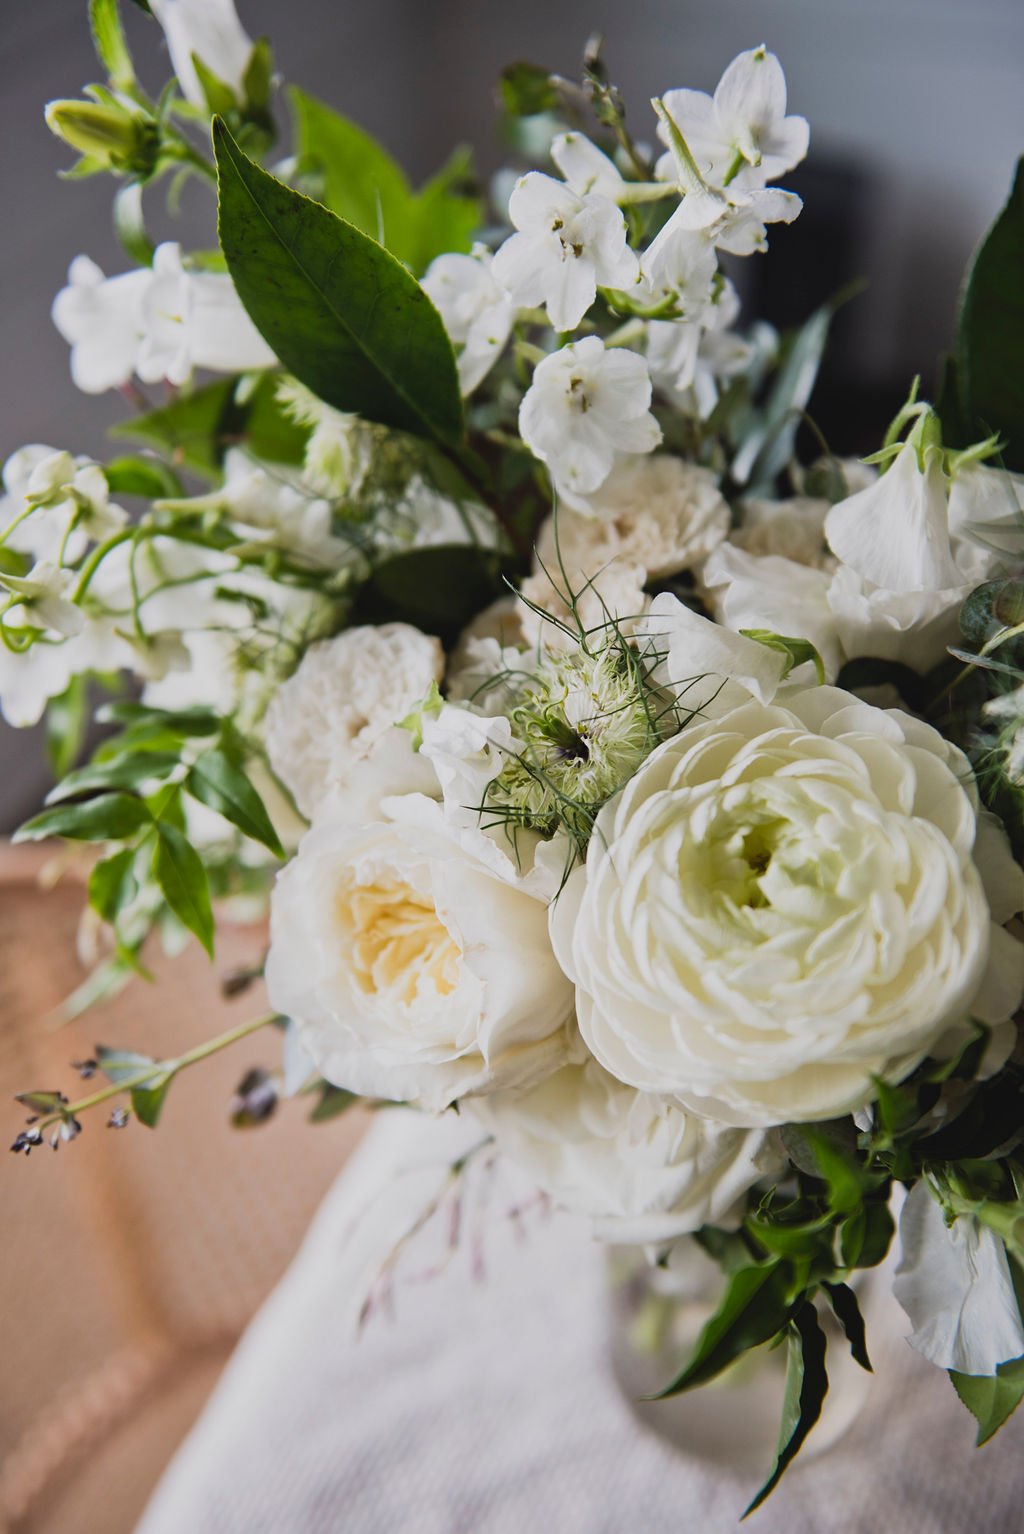 A bridal bouquet filled with ranunculus, delphinium, white sweet pea, spirea, garden roses, and jasmine vine. Designed by Rosemary and Finch in Nashville, TN.